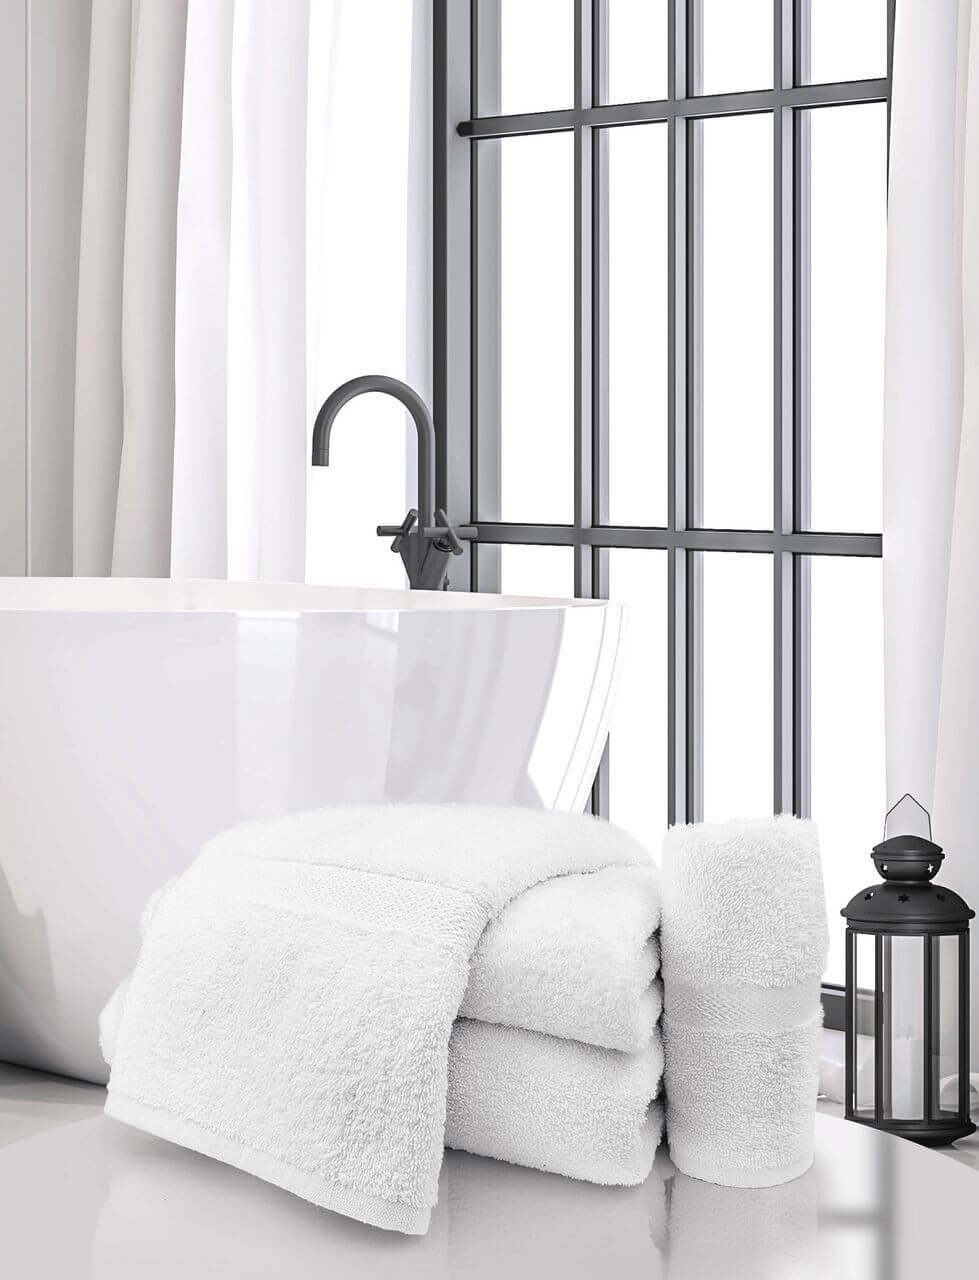 Mastering the Art of Towel Folding: How to Fold Bath Towels?